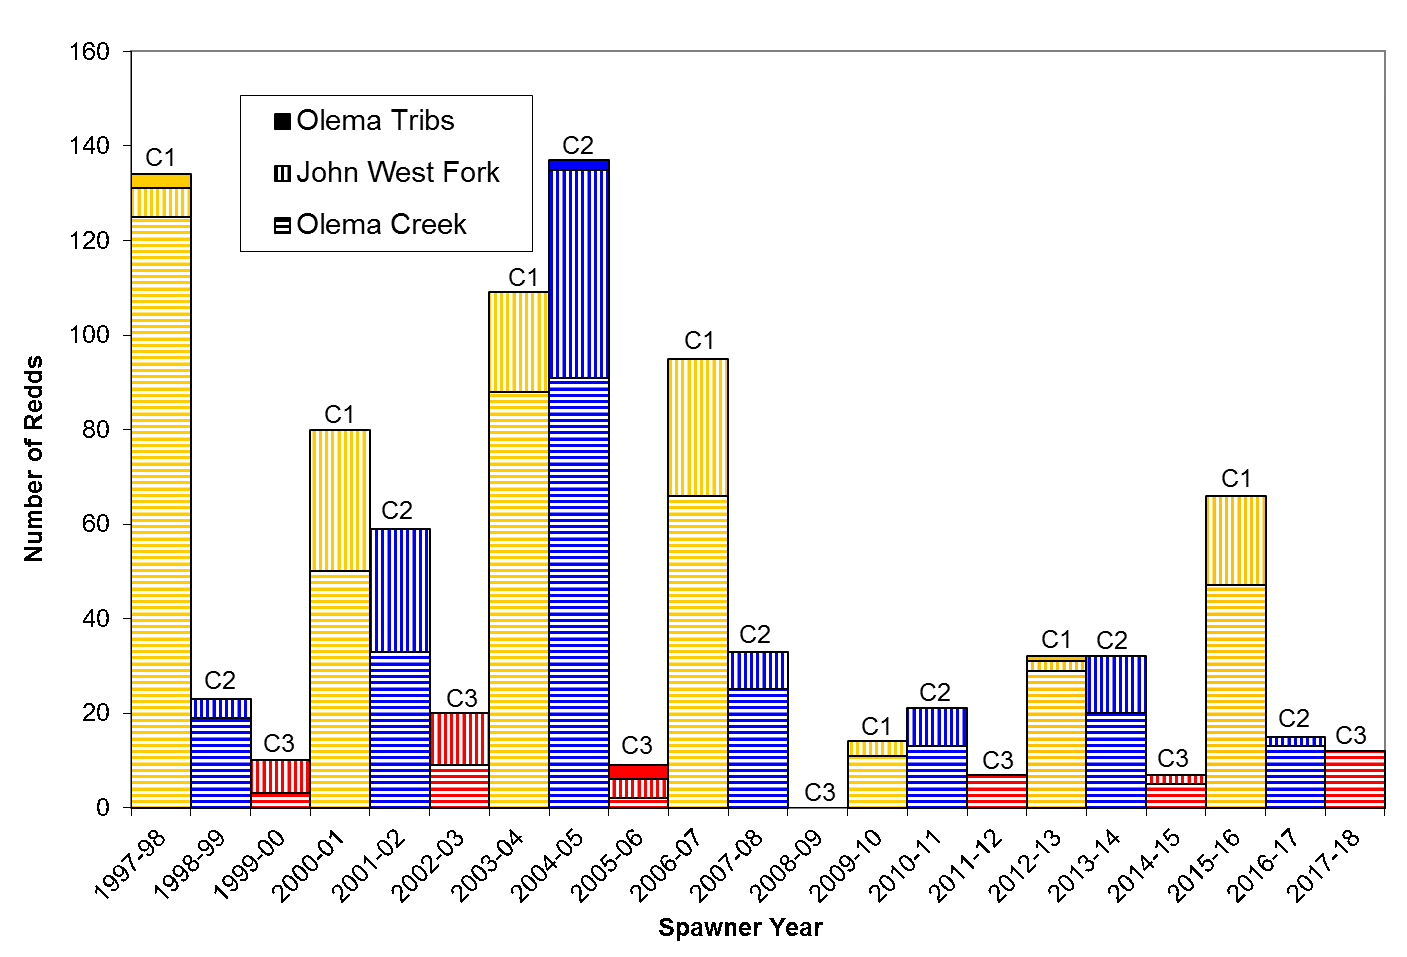 Bar graph of coho redd counts since 1997-98 showing that this winter's cohort produced a slightly more redds than the previous couple of times fish of the same cohort spawned.